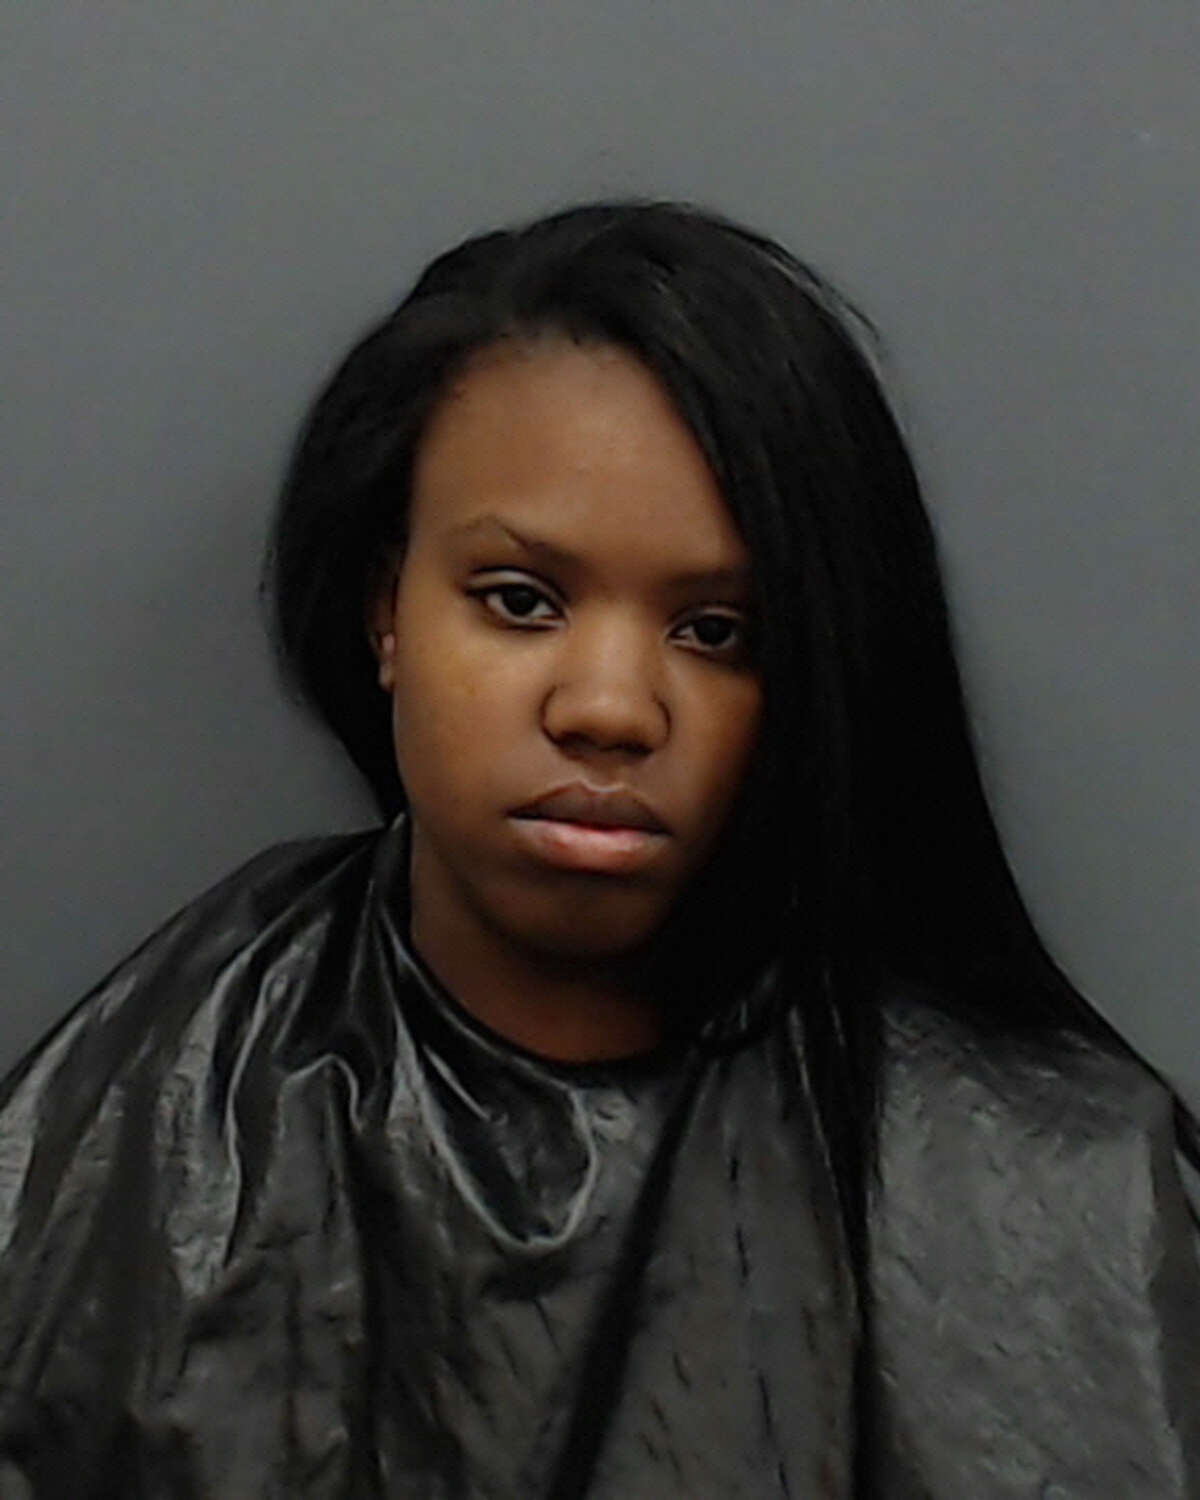 Laneshia Lashae Young, 22, was charged with tampering with or fabricating physical evidence (human corpse), a second-degree felony, and tampering with physical evidence, a third-degree felony.